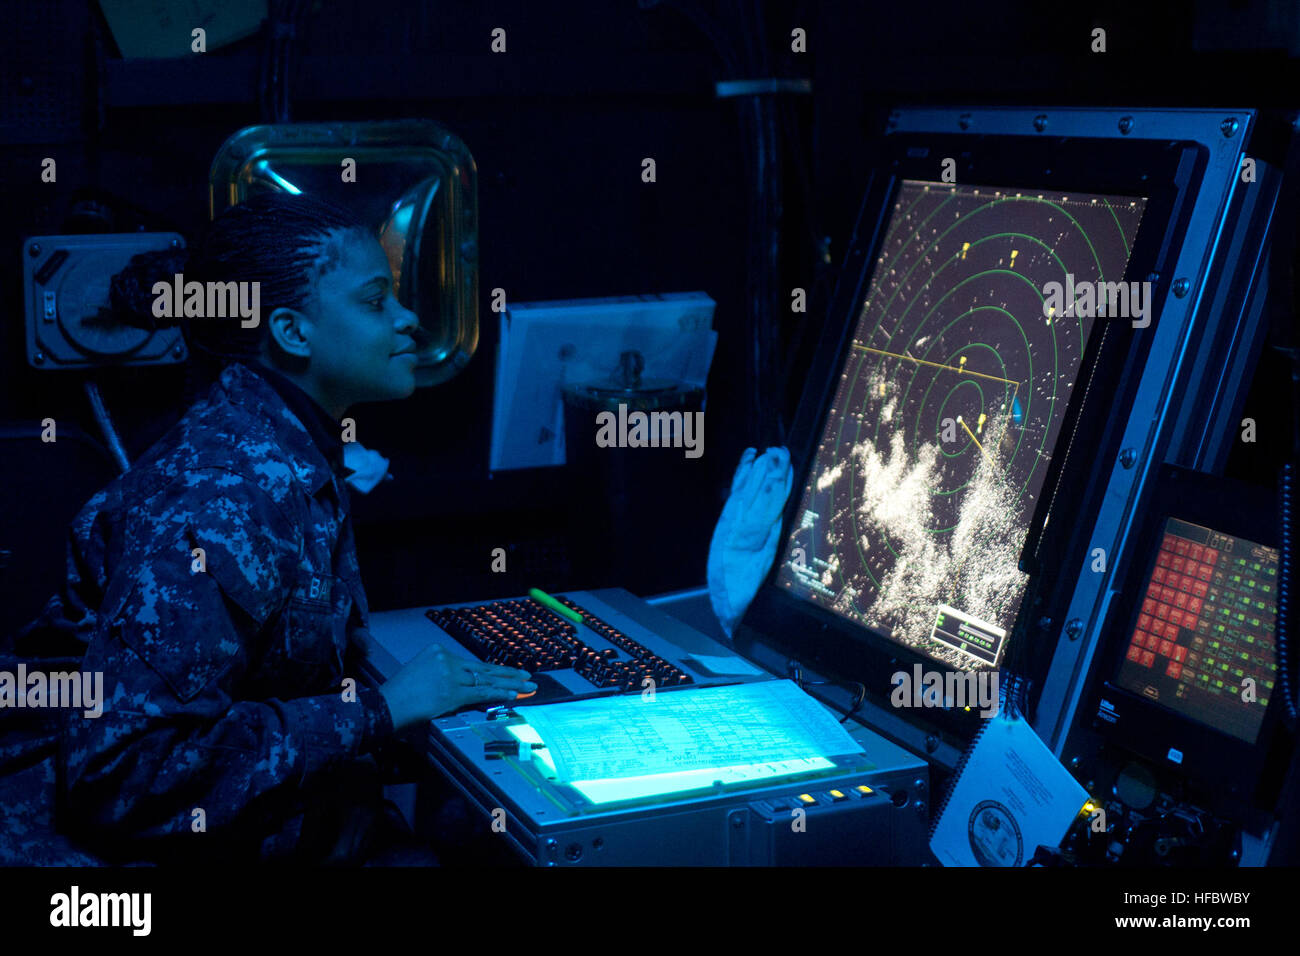 PACIFIC OCEAN (Sept. 18, 2012) Air Traffic Controller 3rd Class Nakivia Barnes, from Georgetown, Texas, monitors flight operations in the air traffic control center aboard the aircraft carrier USS George Washington (CVN 73). George Washington and its embarked air wing, Carrier Air Wing (CVW) 5, provide a combat-ready force that protects and defends the collective maritime interest of the U.S. and its allies and partners in the Asia-Pacific region. (U.S. Navy photo by Mass Communication Specialist 3rd Class William Pittman/Released) 120918-N-SF704-235 Join the conversation http://www.facebook.c Stock Photo